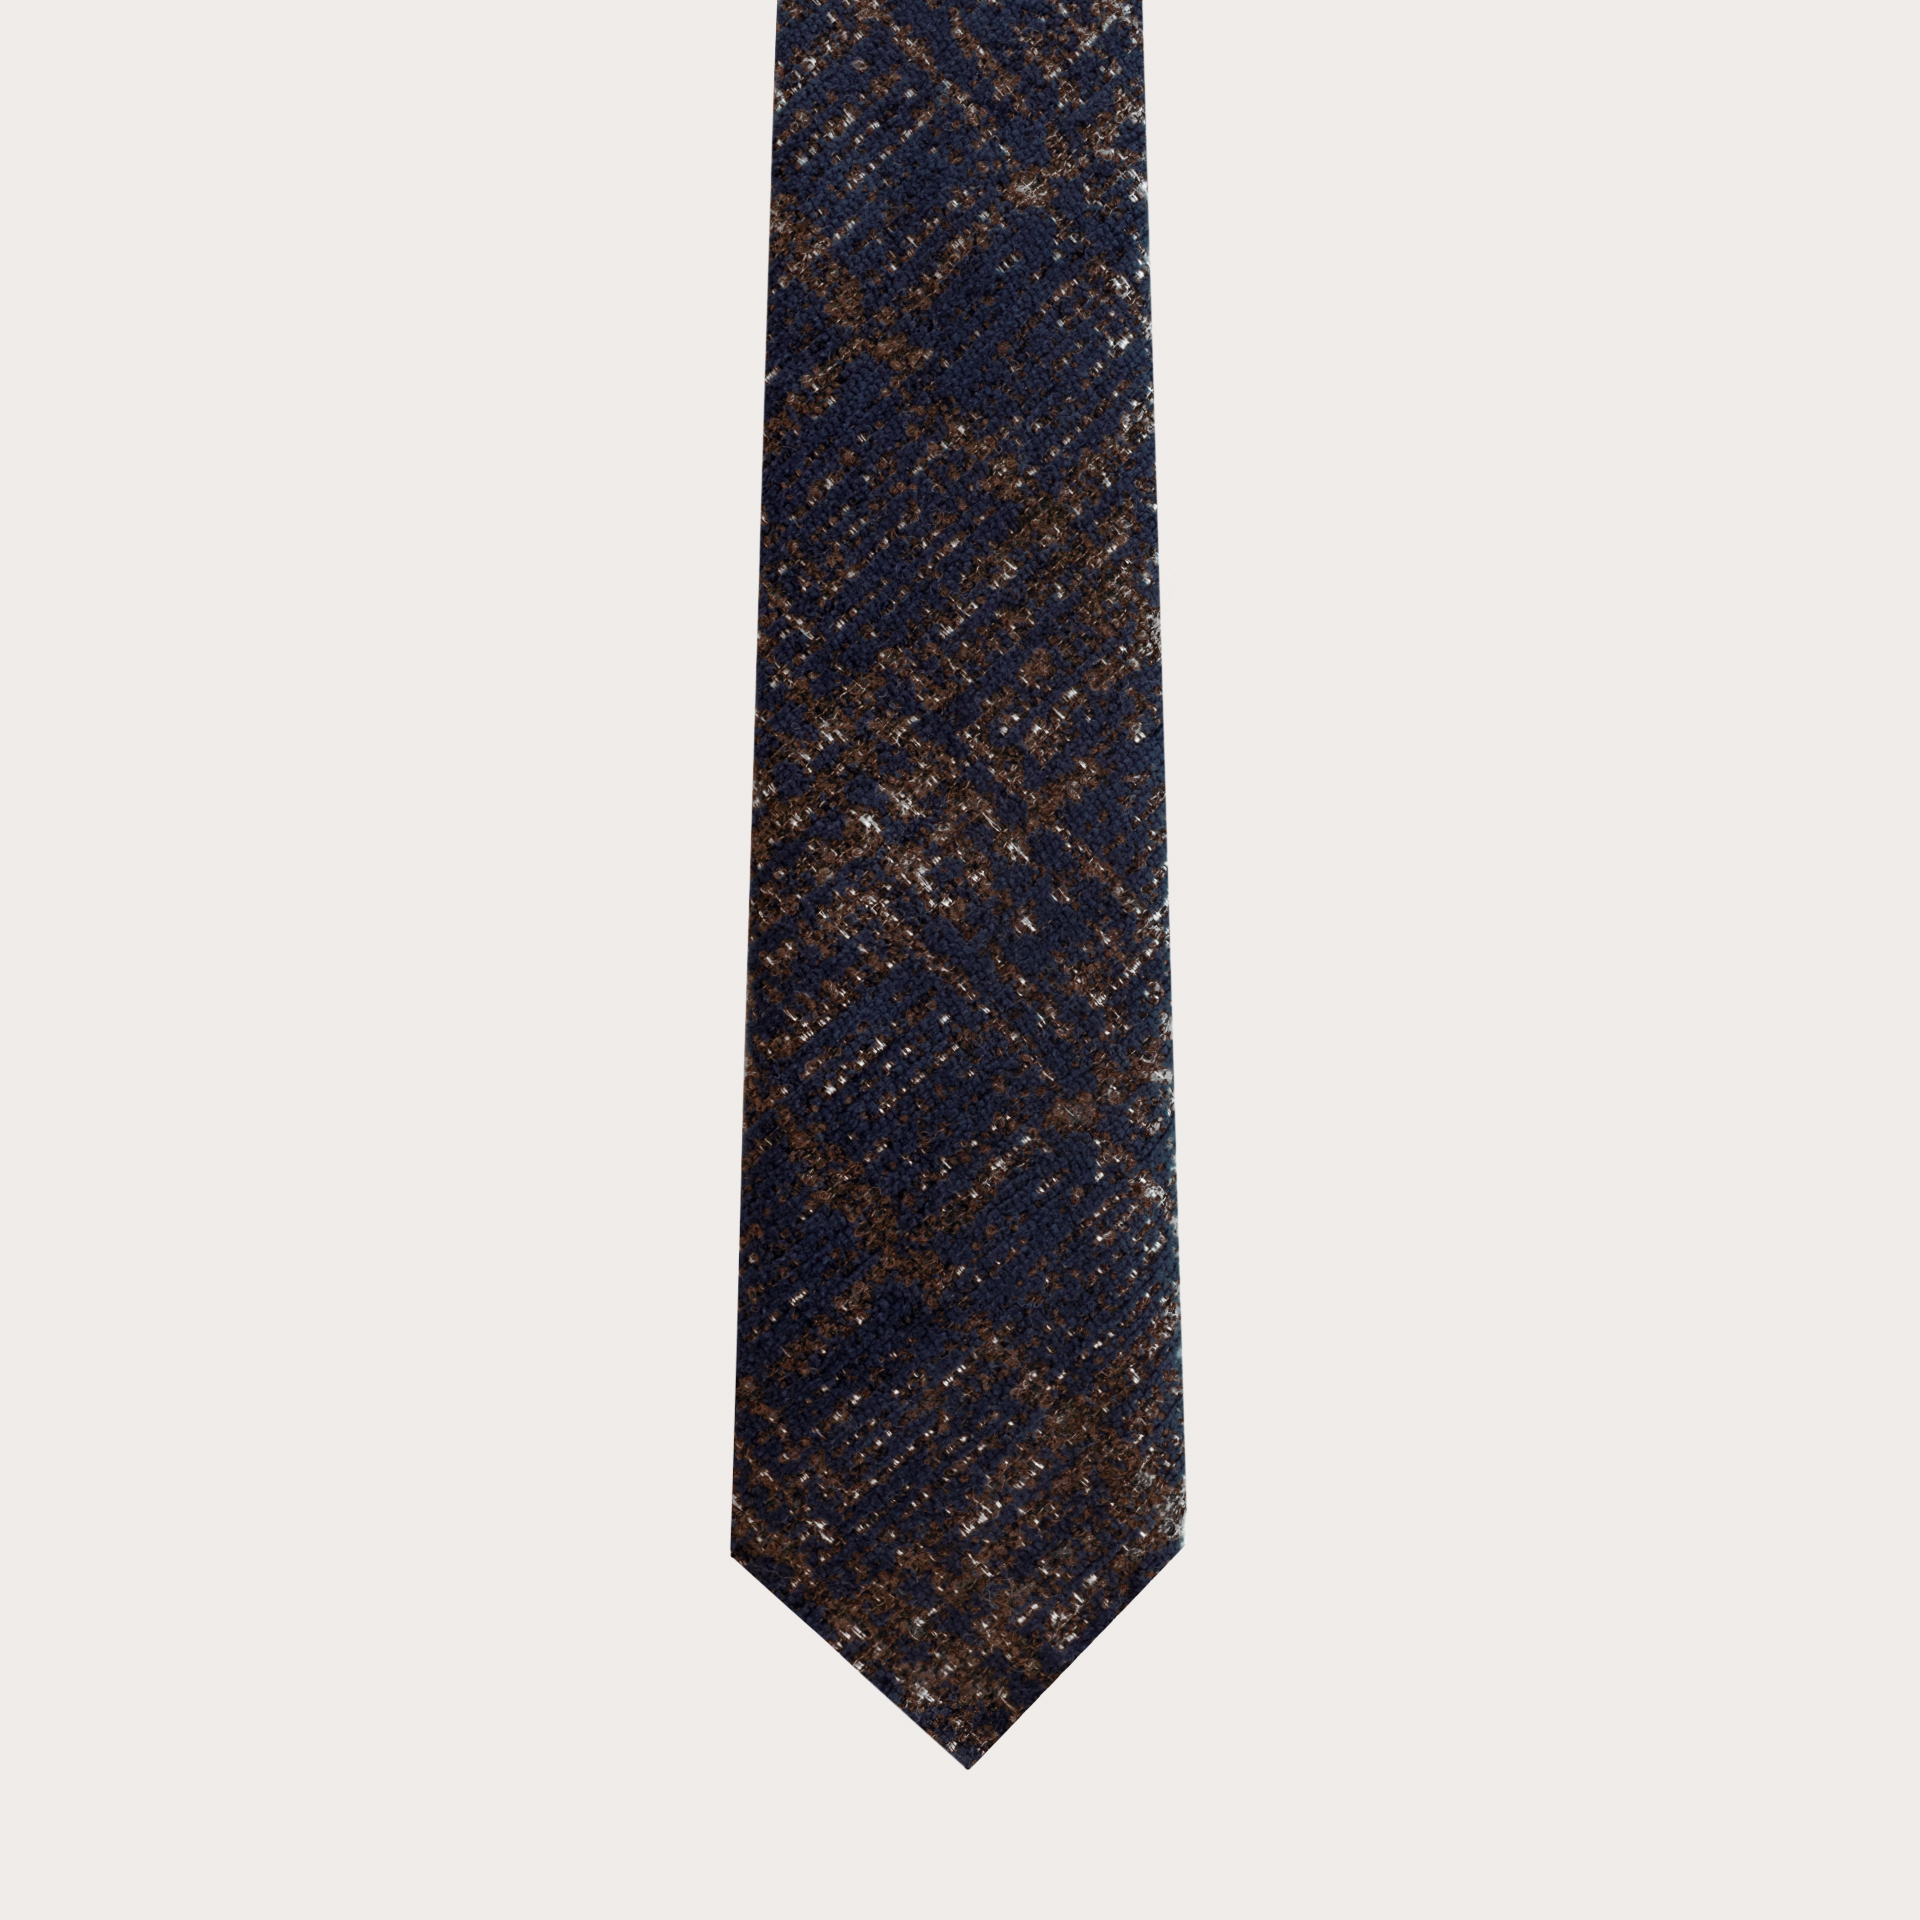 Unlined necktie in wool and silk, blue and brown tartan